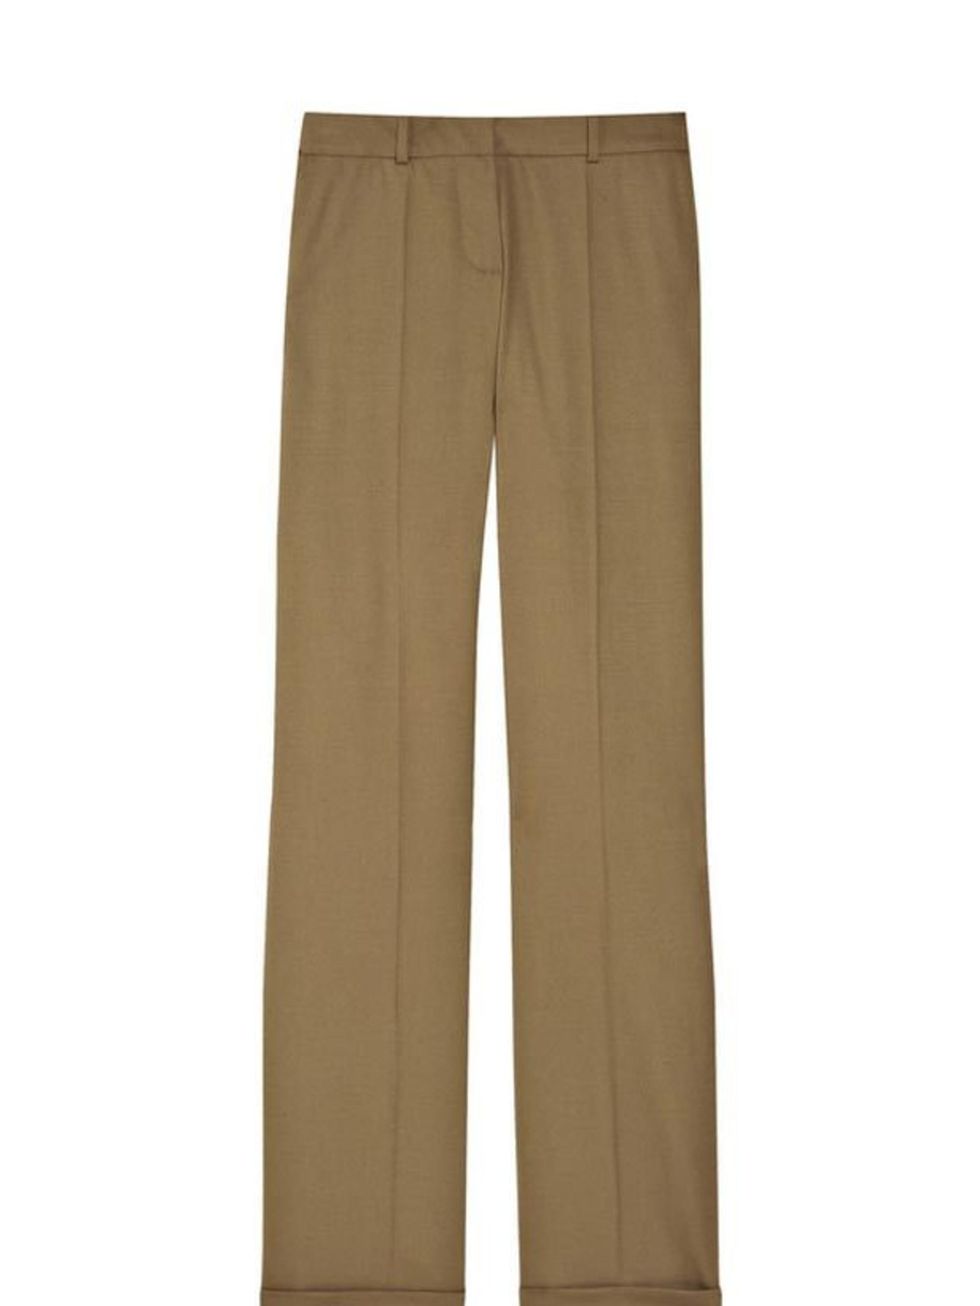 <p>Chloe wool-blend trousers, £320, available at <a href="%20http%3A//www.net-a-porter.com/product/99826">Net-a-Porter</a></p>